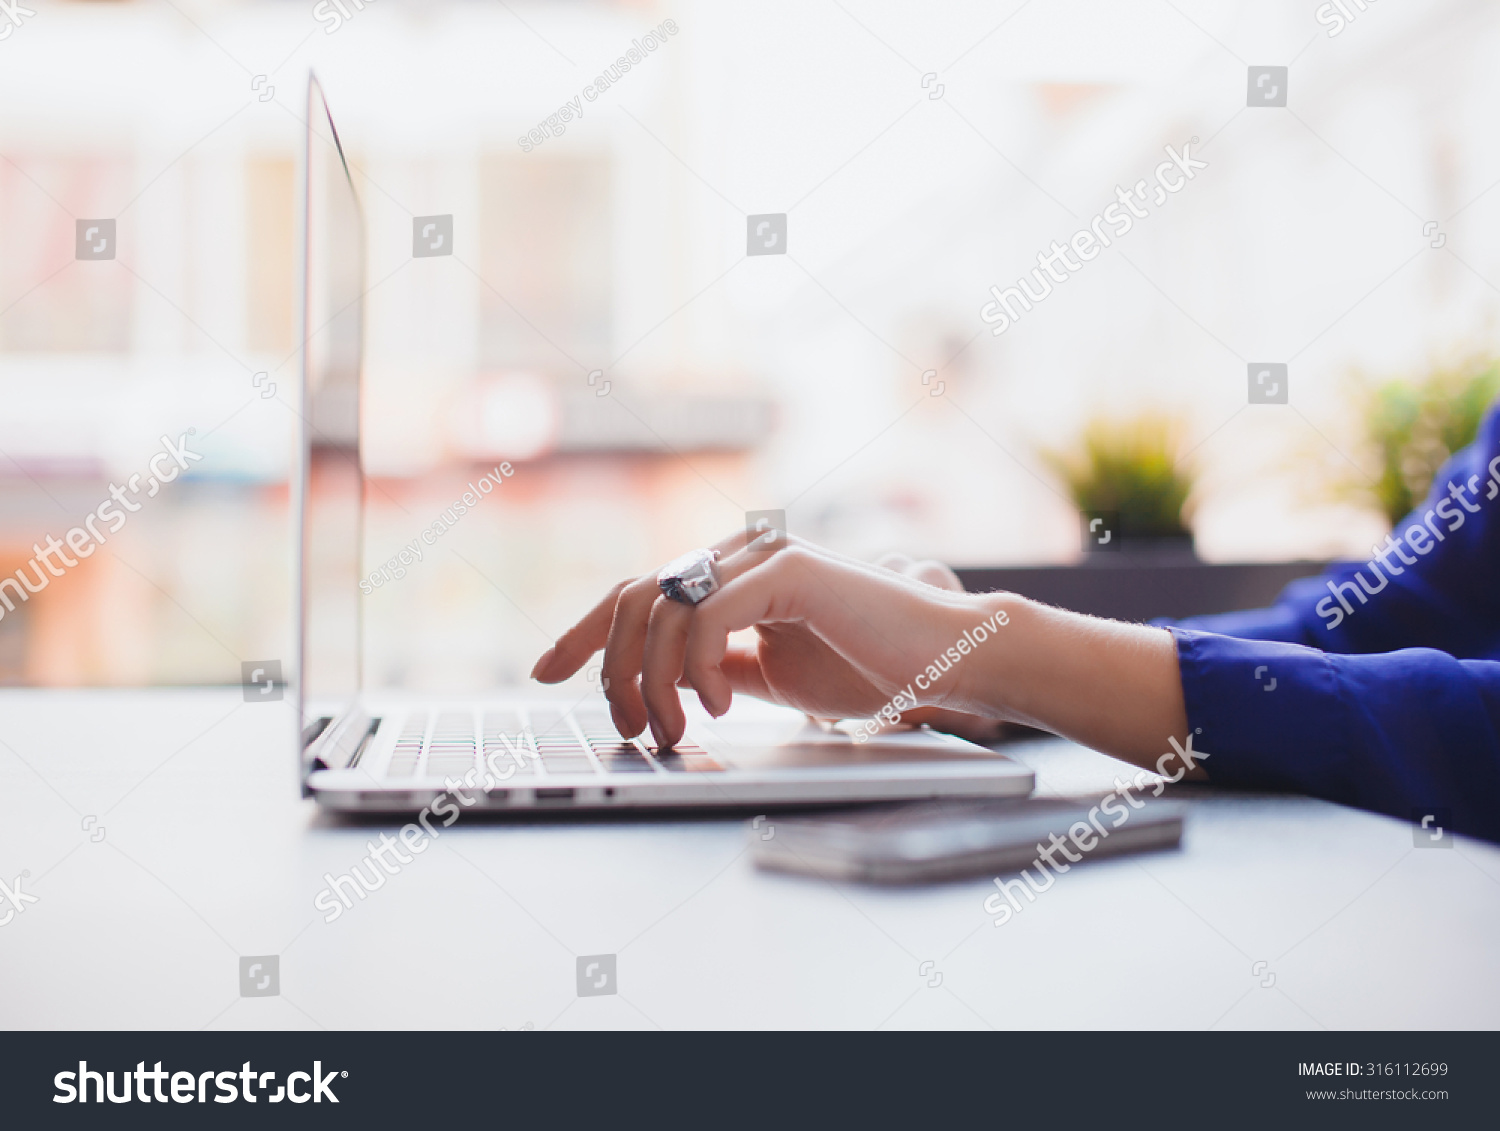 Close-up image of woman hands typing and writing massages on laptop,working on cafe.Overhead of essentials for modern young person.sensual woman reading and working,Urban #316112699